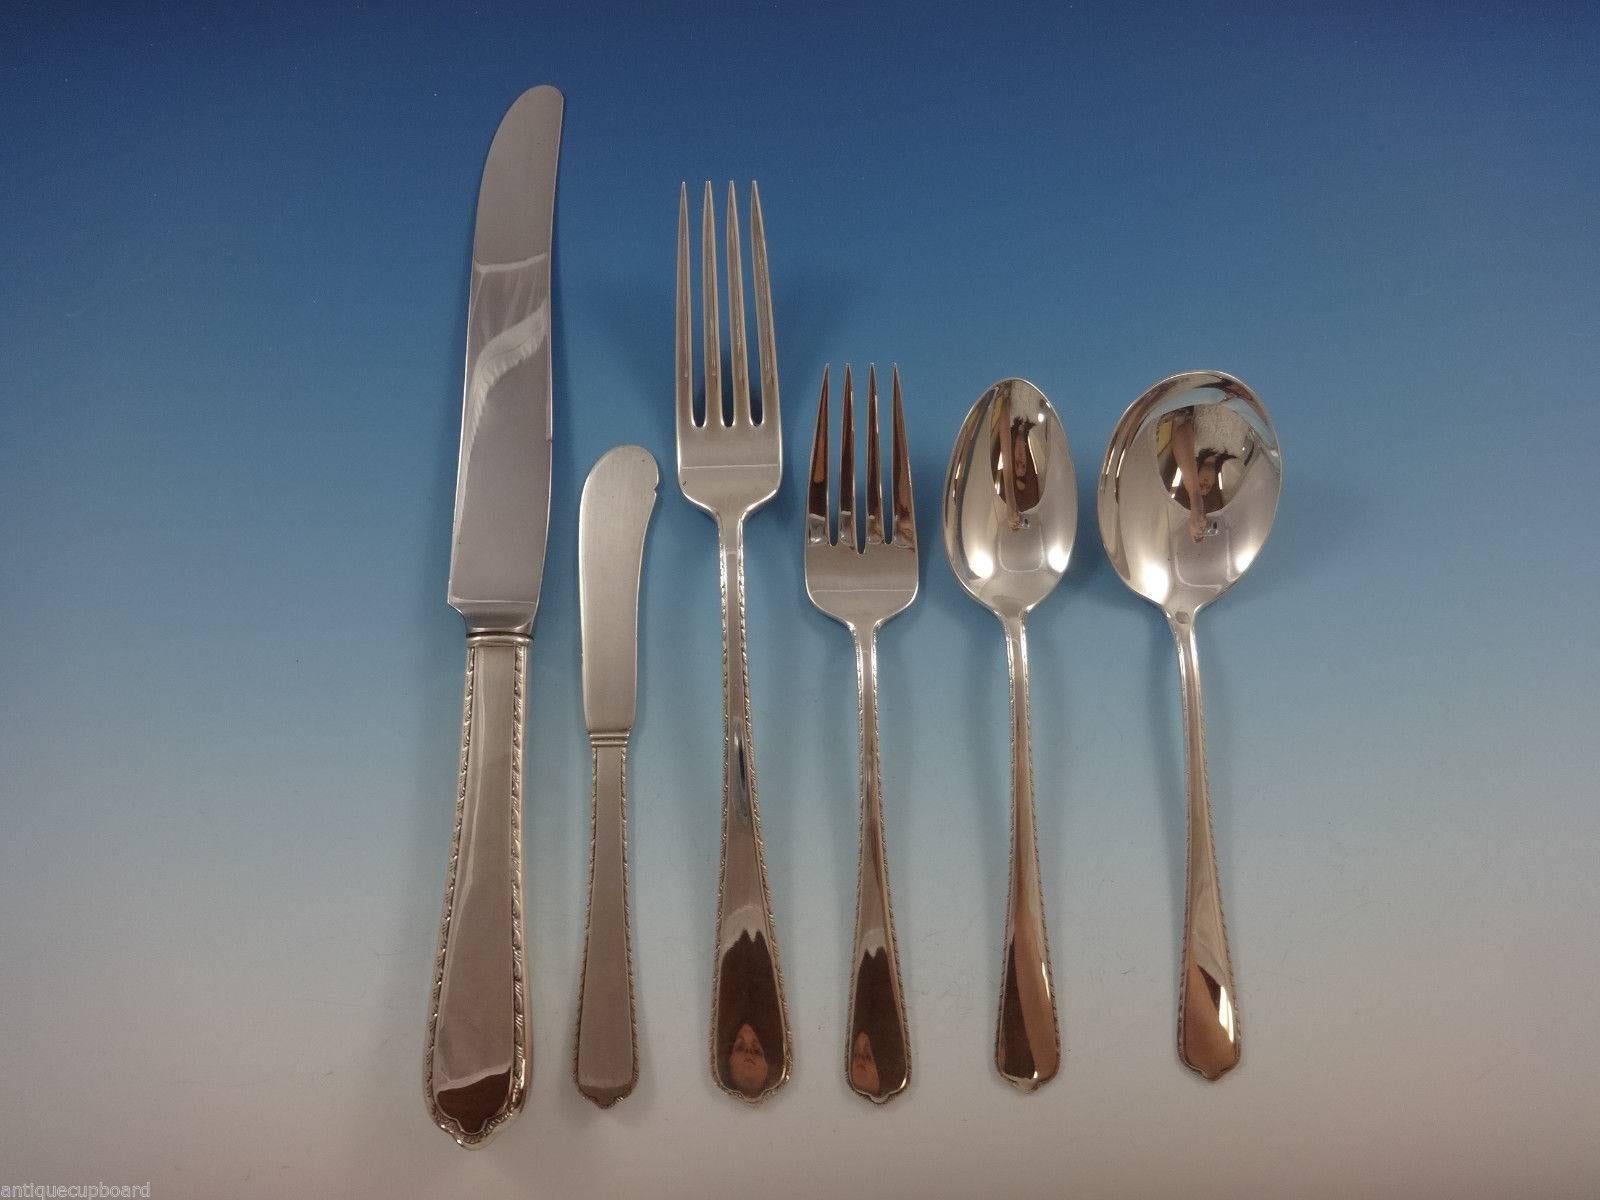 Scarce windemere by international sterling silver dinner size flatware set - 36 pieces. This set includes:

Six dinner knives, 9 3/4